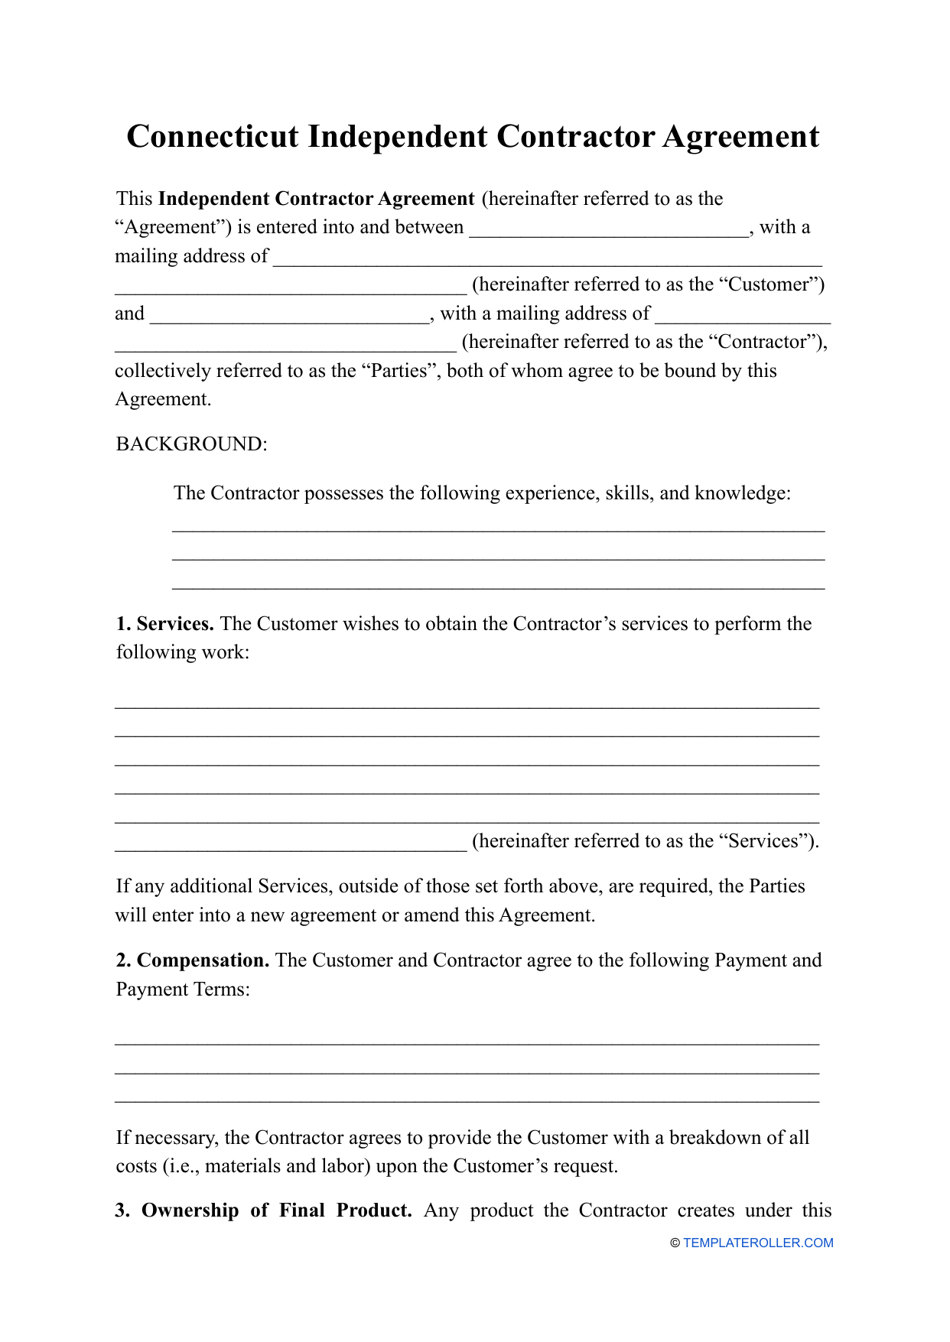 Independent Contractor Agreement Template - Connecticut, Page 1